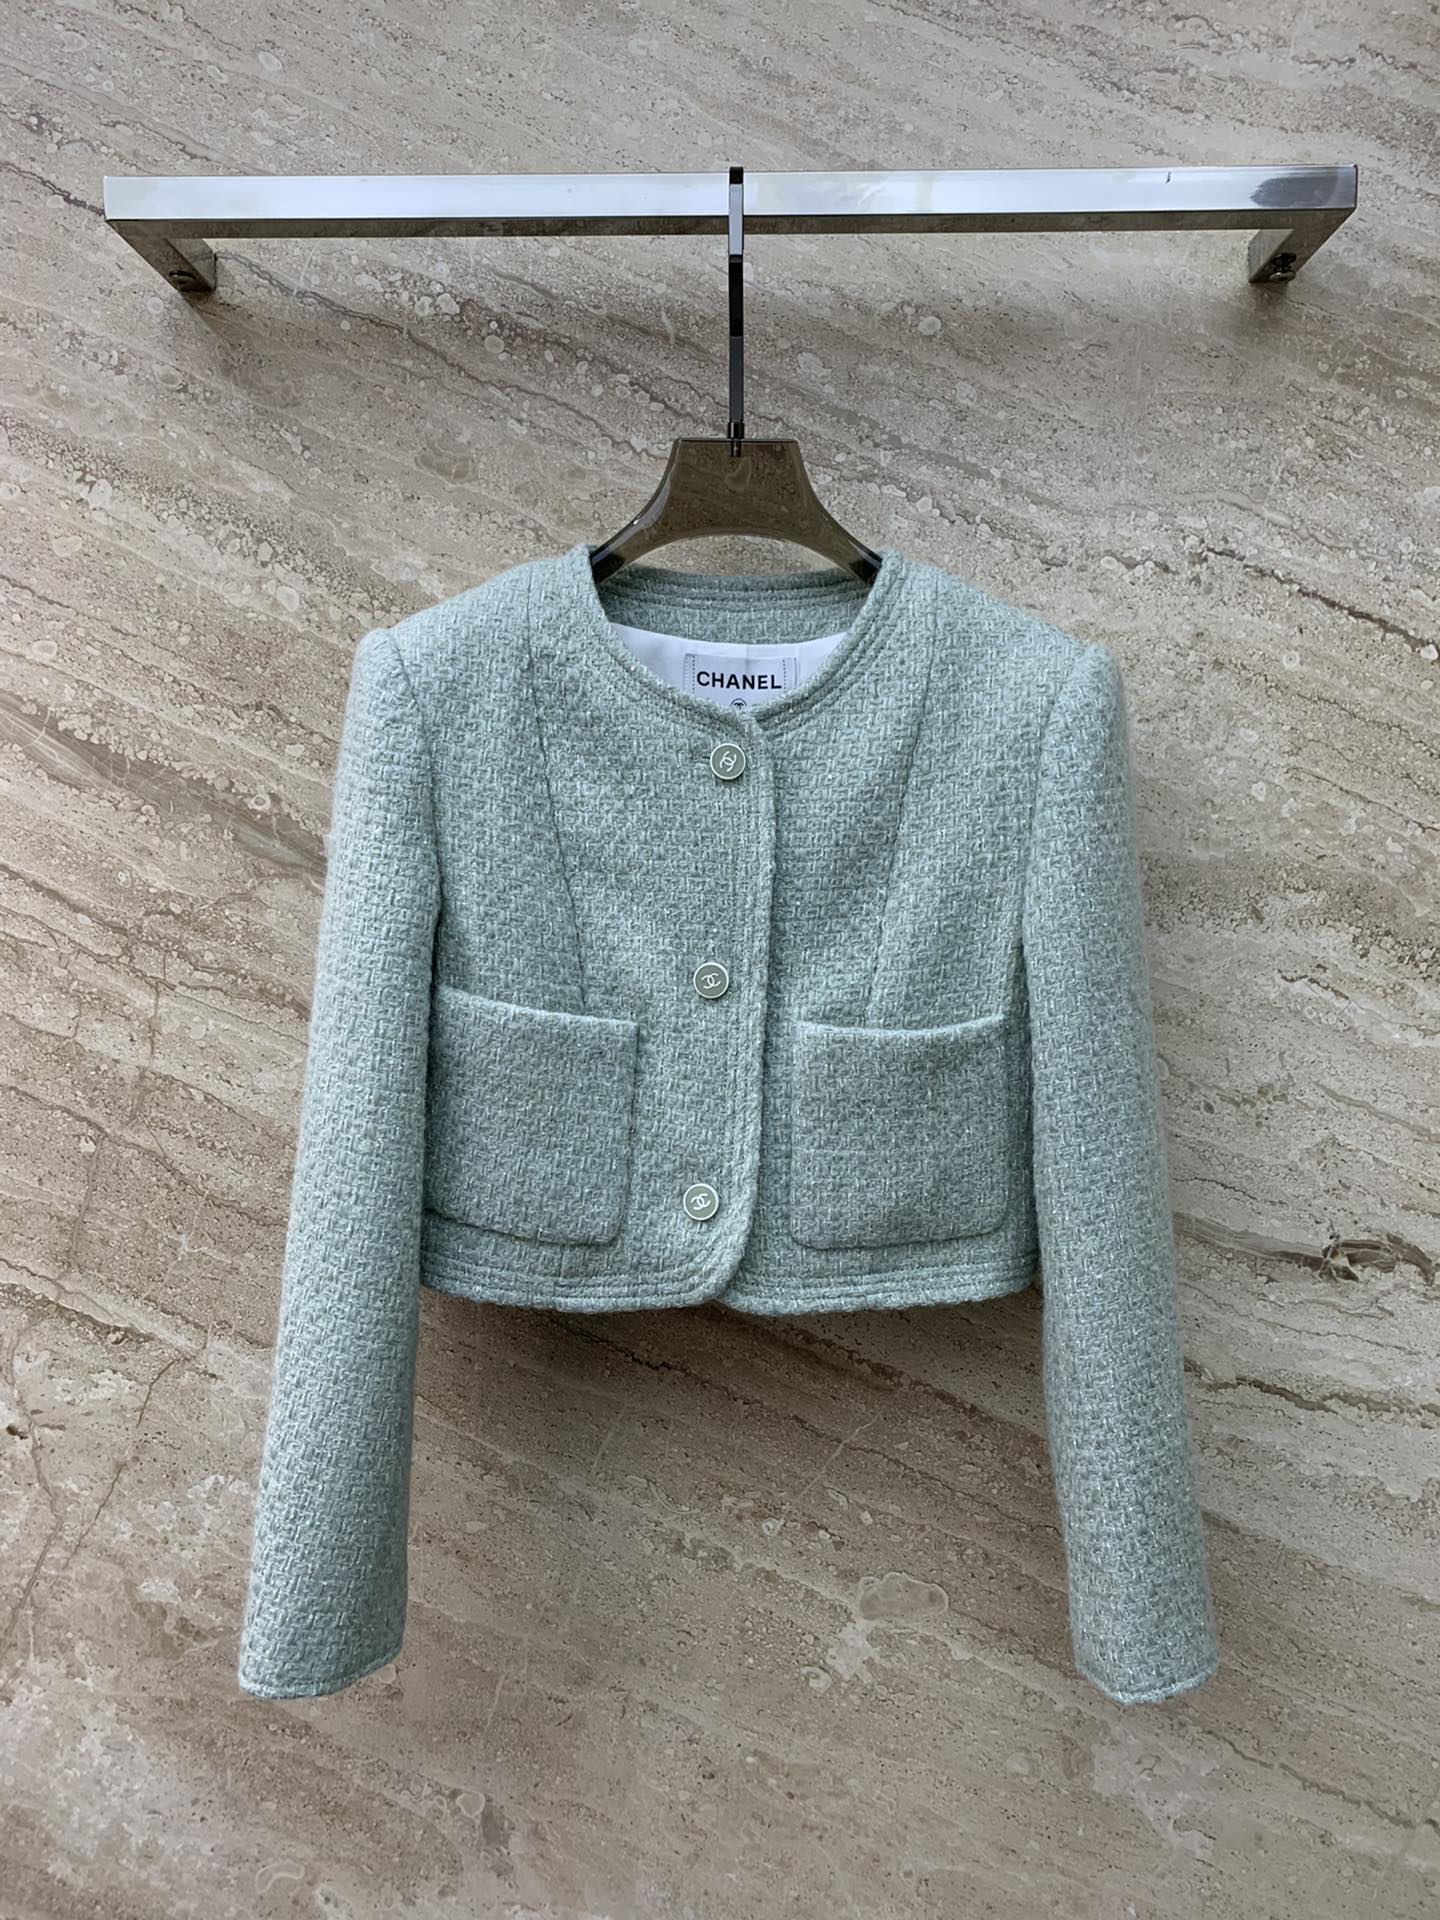 Chanel Clothing Coats & Jackets Fall/Winter Collection Vintage